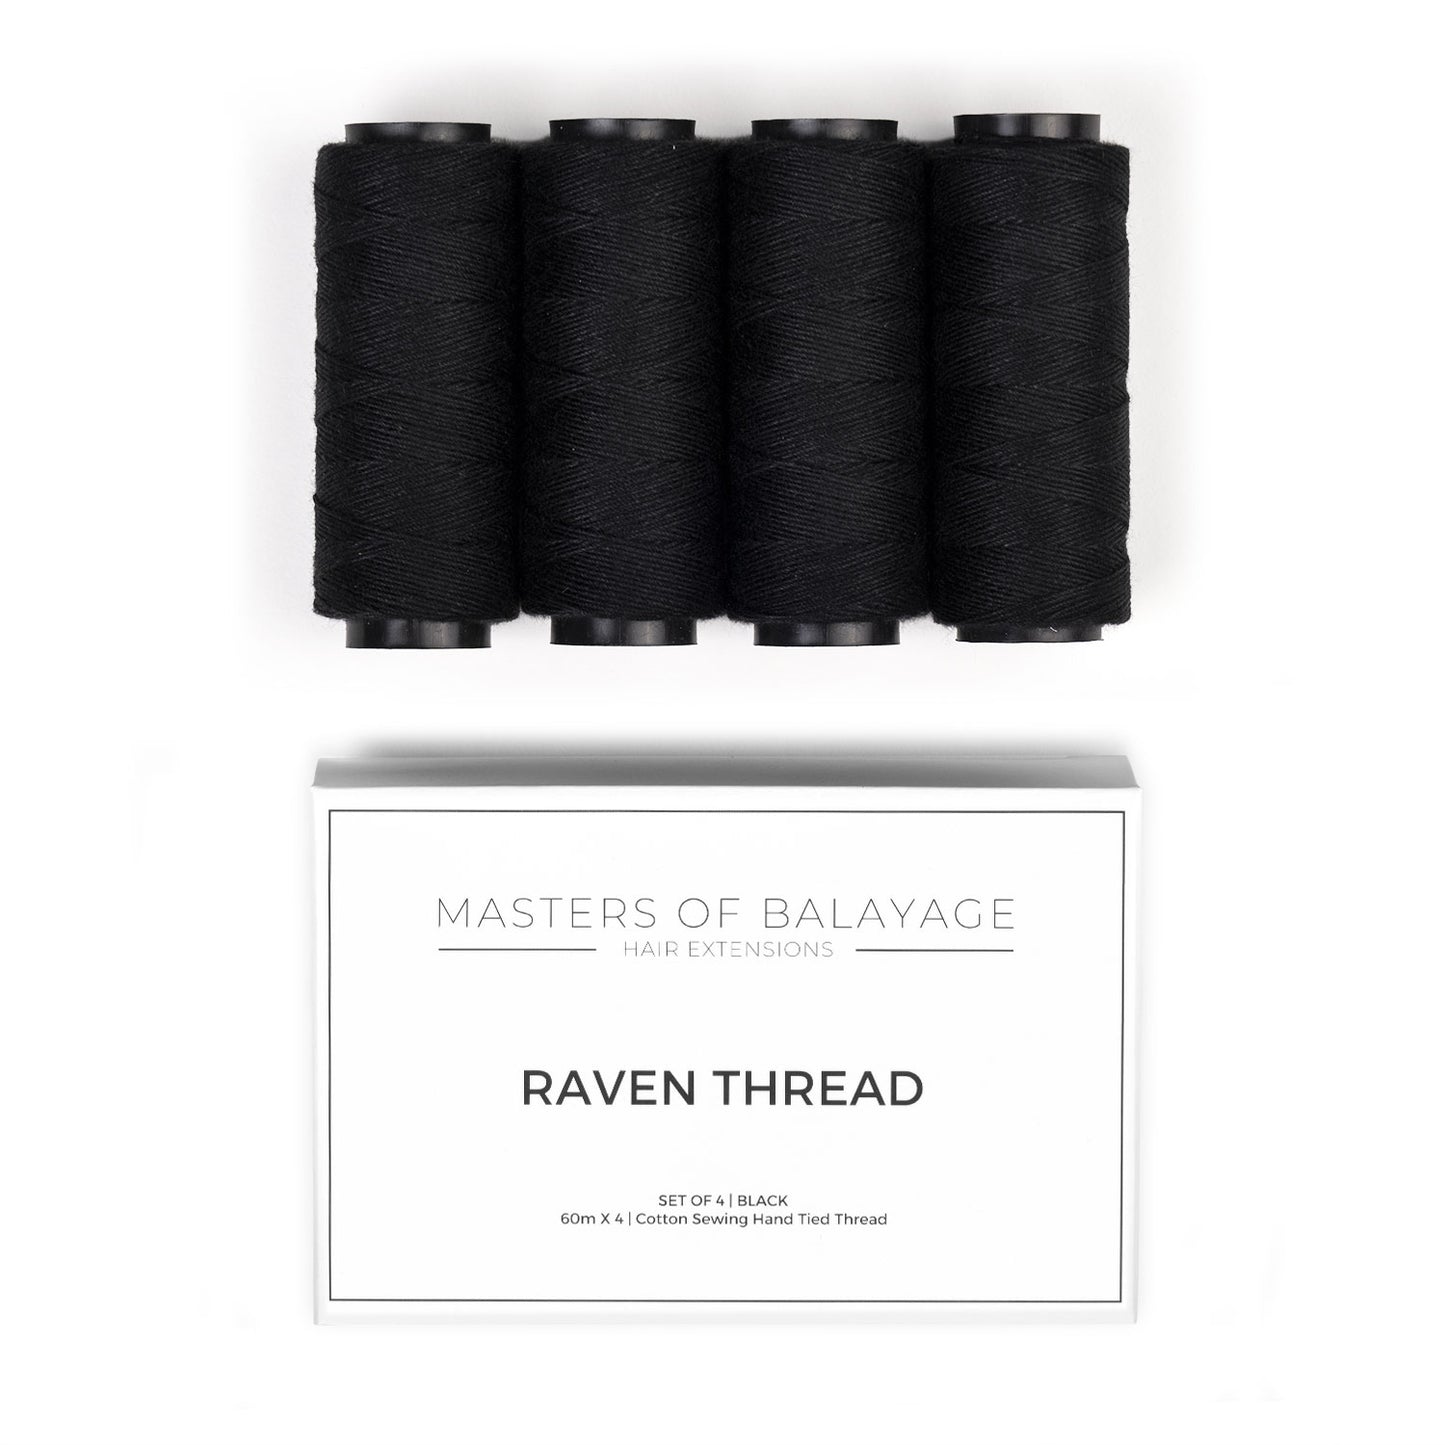 Cotton Sewing Hand-Tied Thread - Raven - MSRP